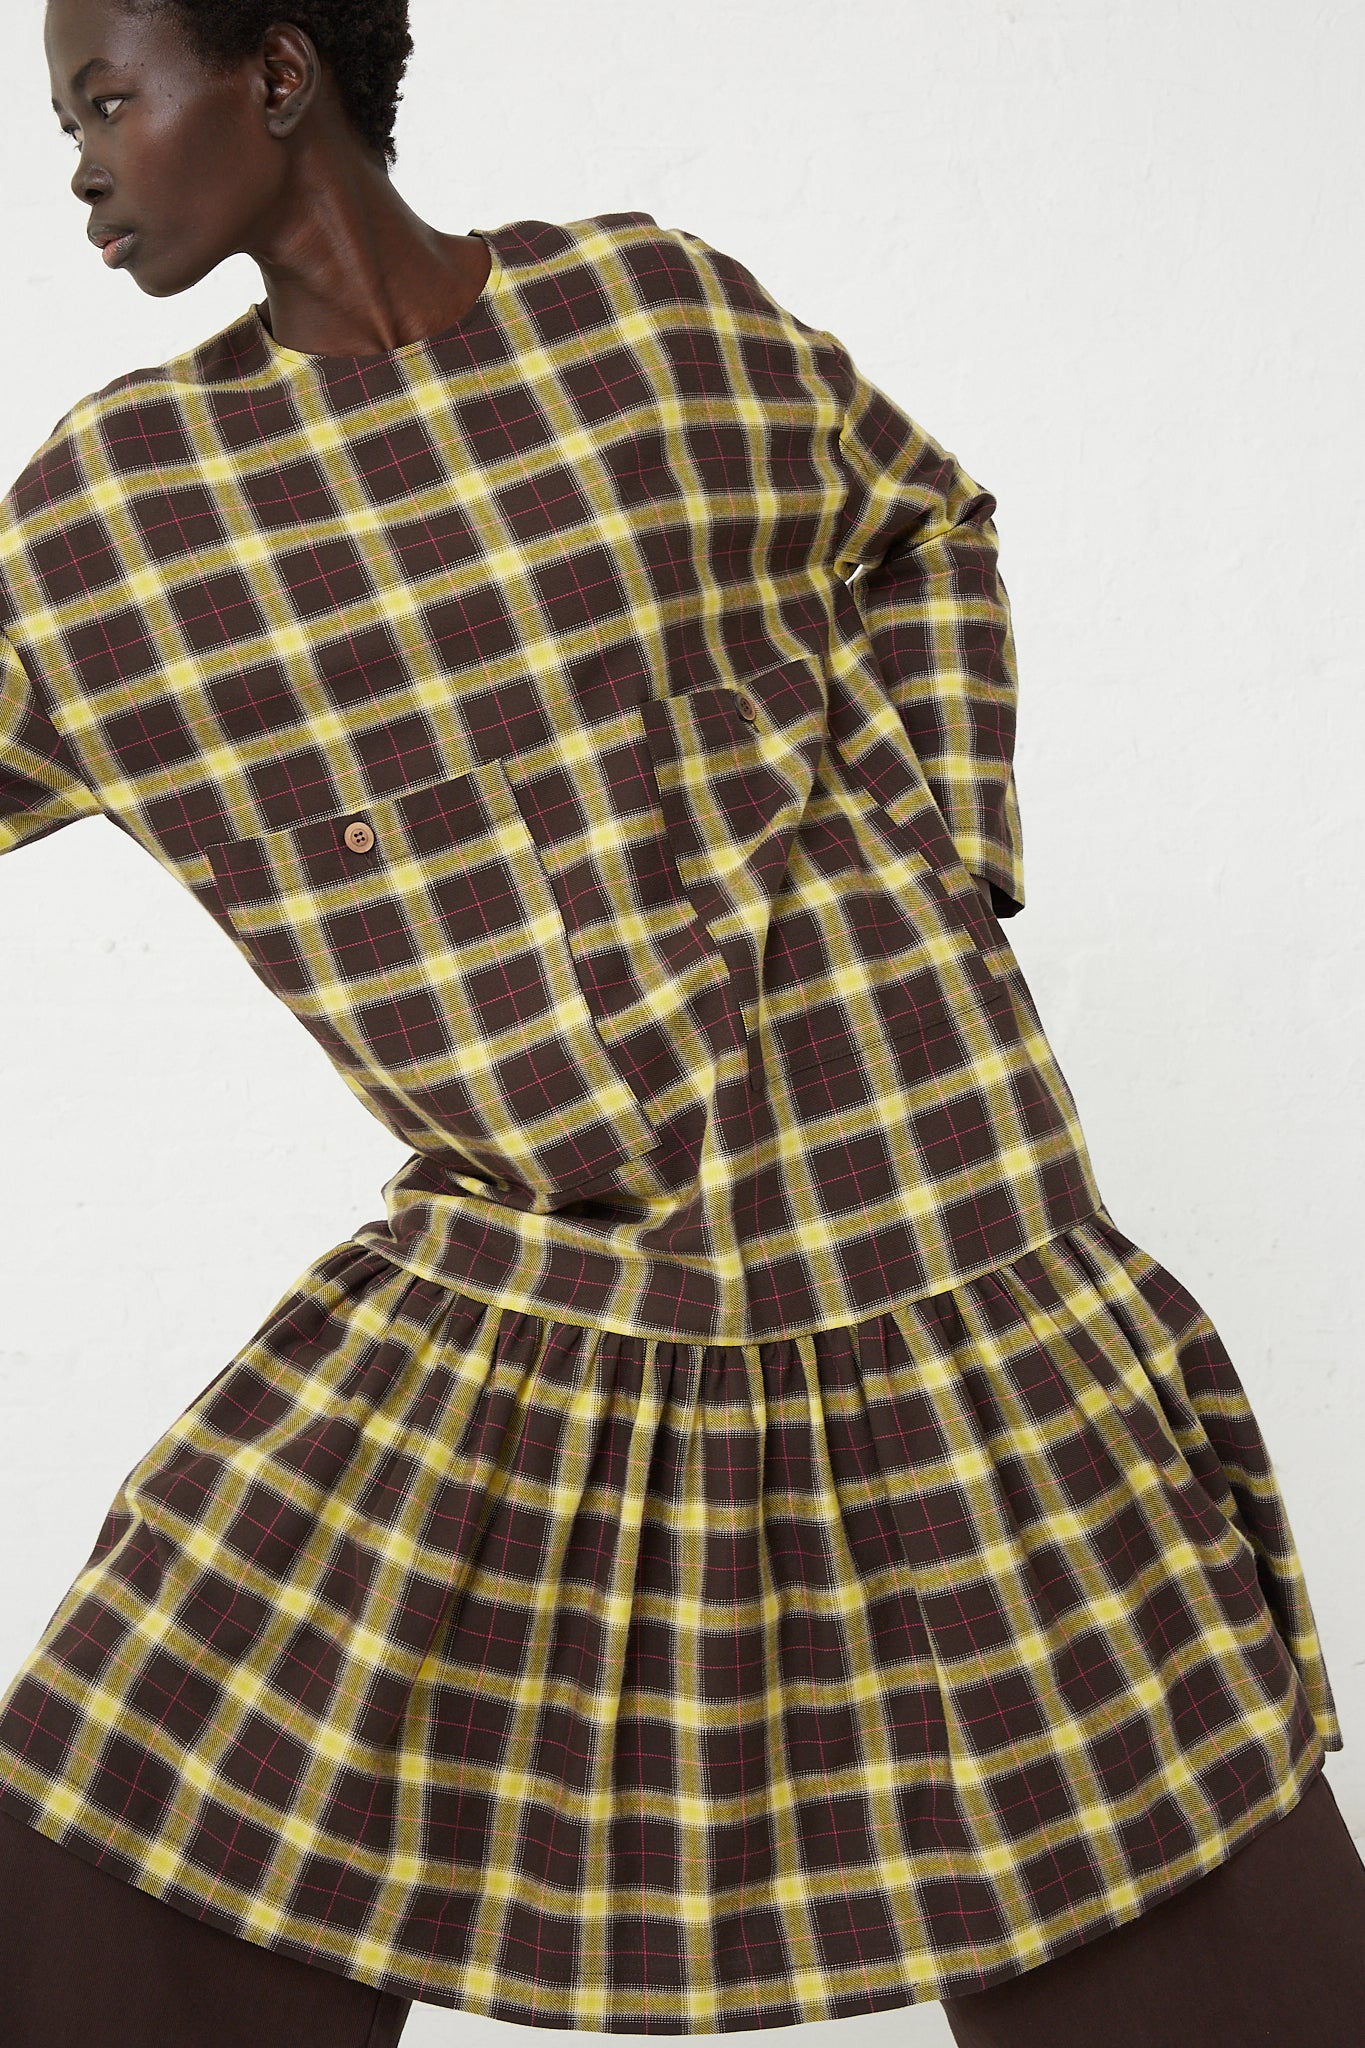 An oversized patch pocket midi dress in a yellow and brown plaid check cotton fabric called the Fun Dress in Check Brown, Yellow and Pink by AVN.